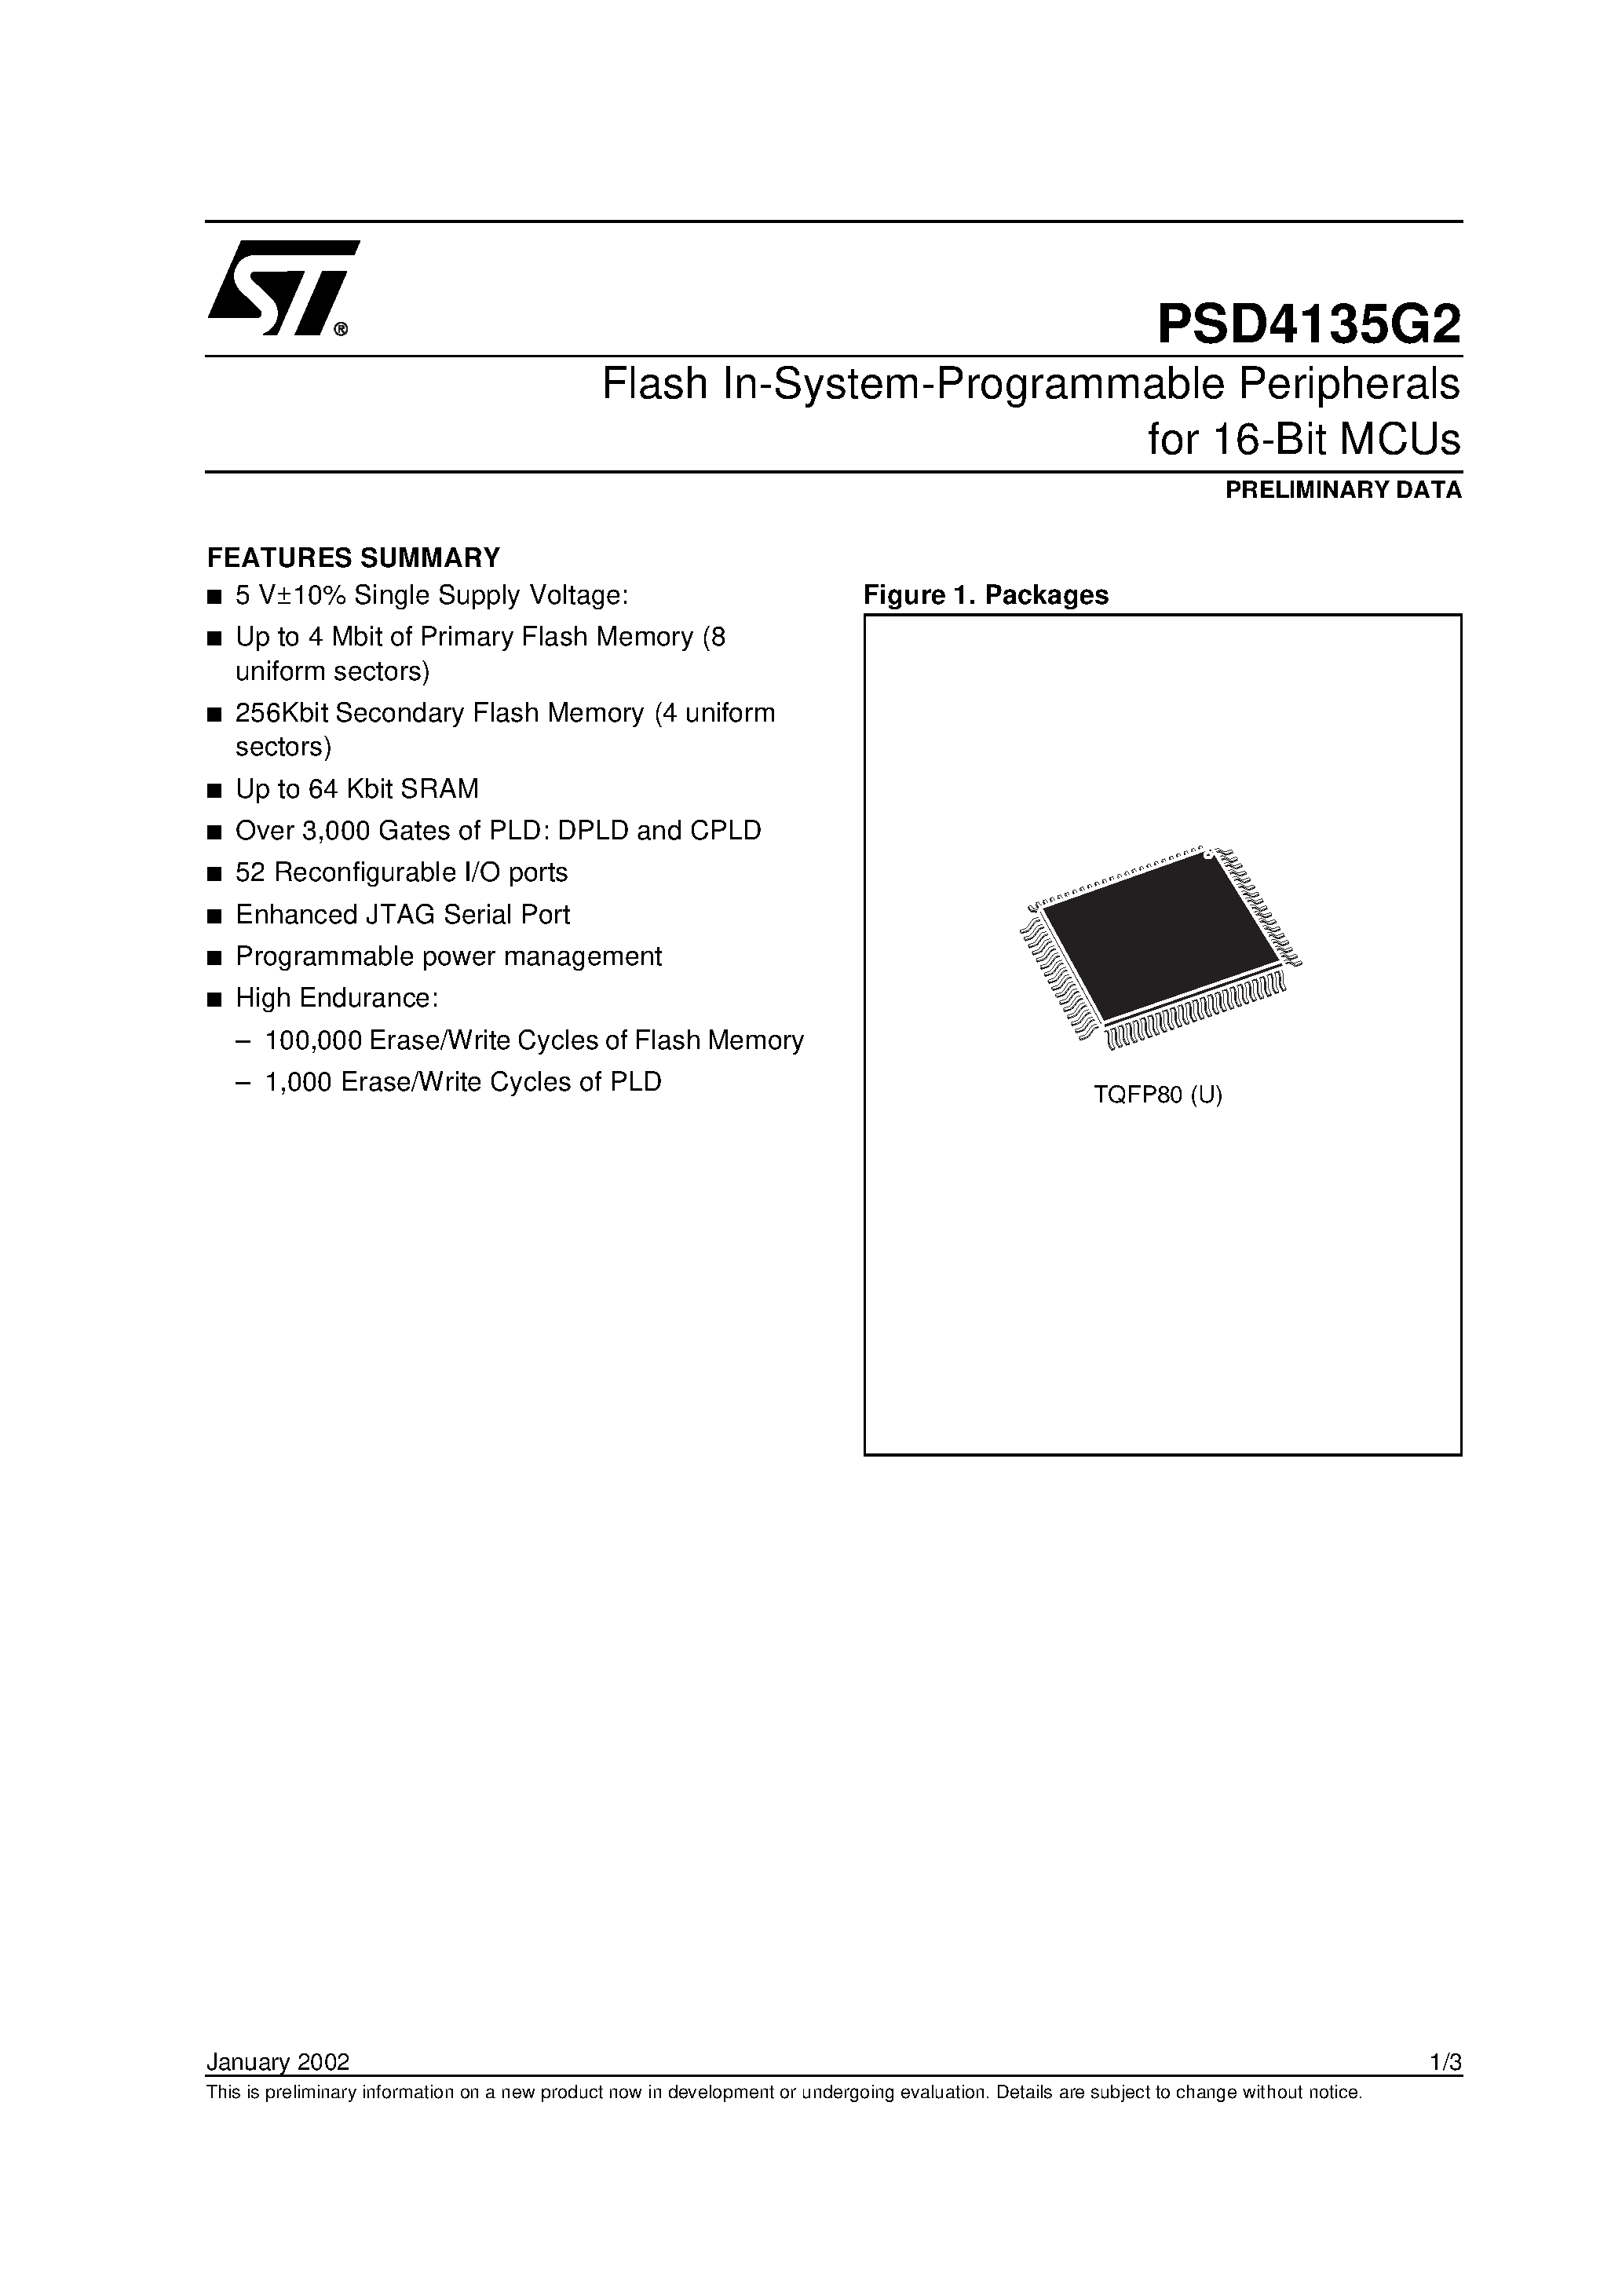 Даташит PSD4135F1-B-15J - Flash In-System-Programmable Peripherals for 16-Bit MCUs страница 1